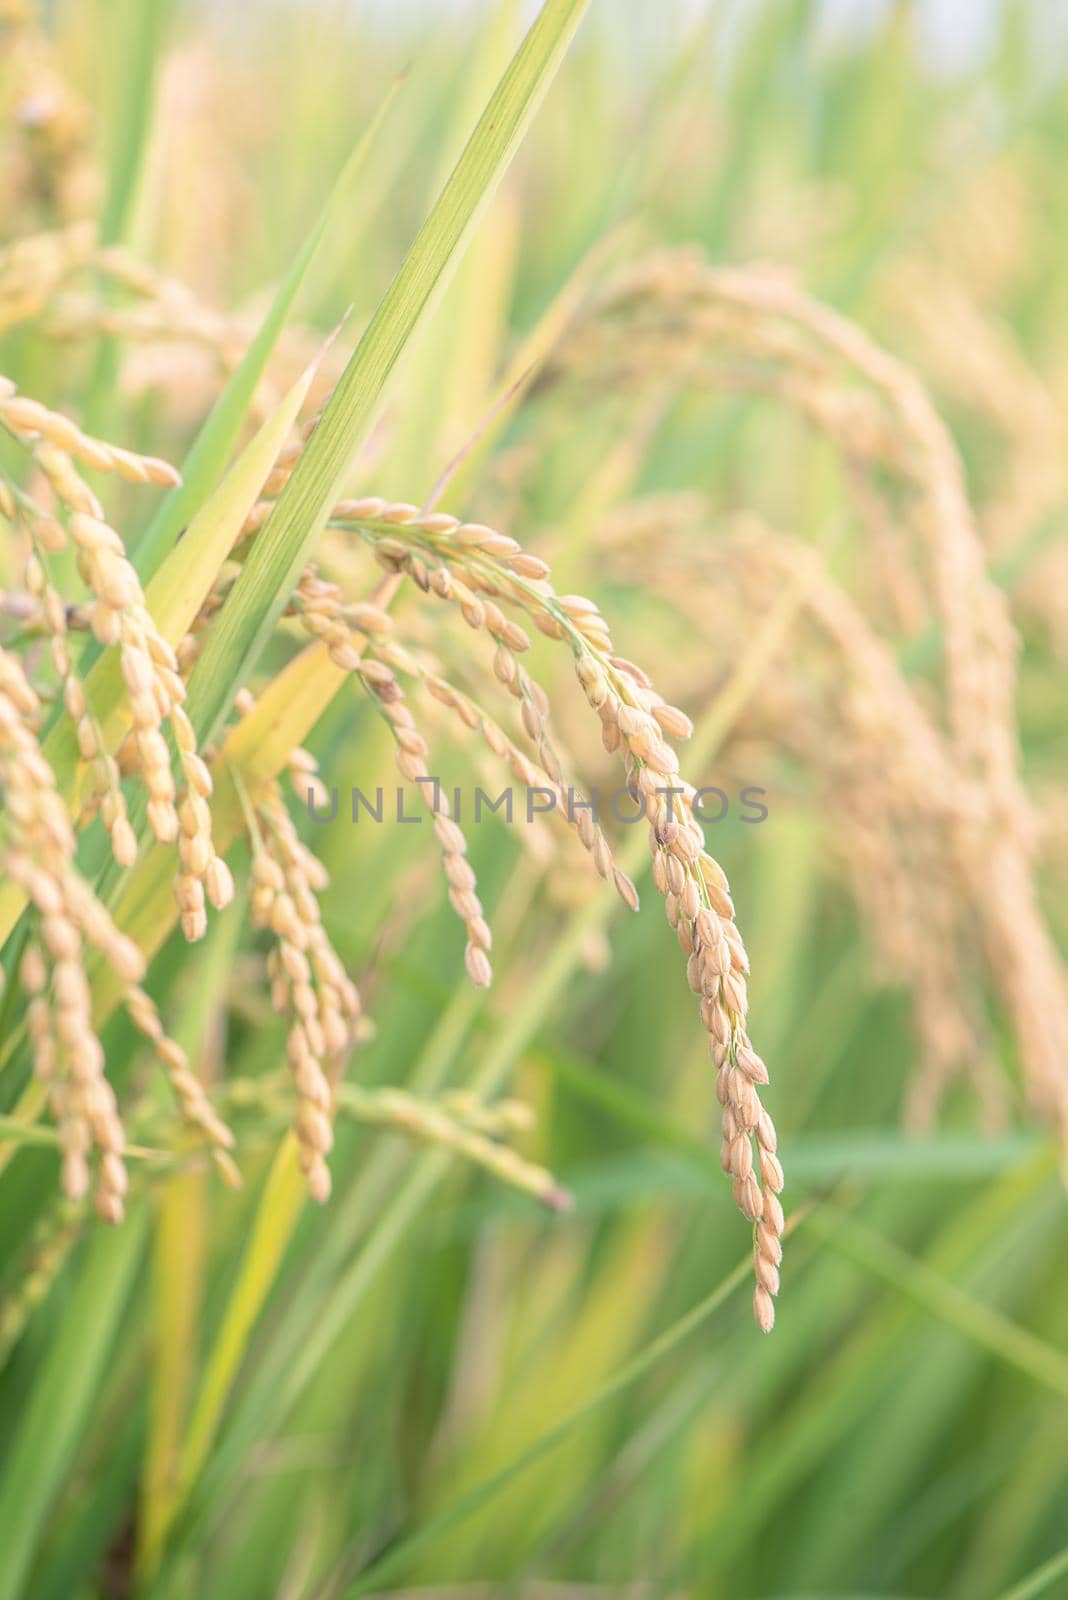 Yellow paddy field swaying over sunset day time in Asia. Raw short grain rice crop stalk, ears detals, organic agriculture farming concept, close up.